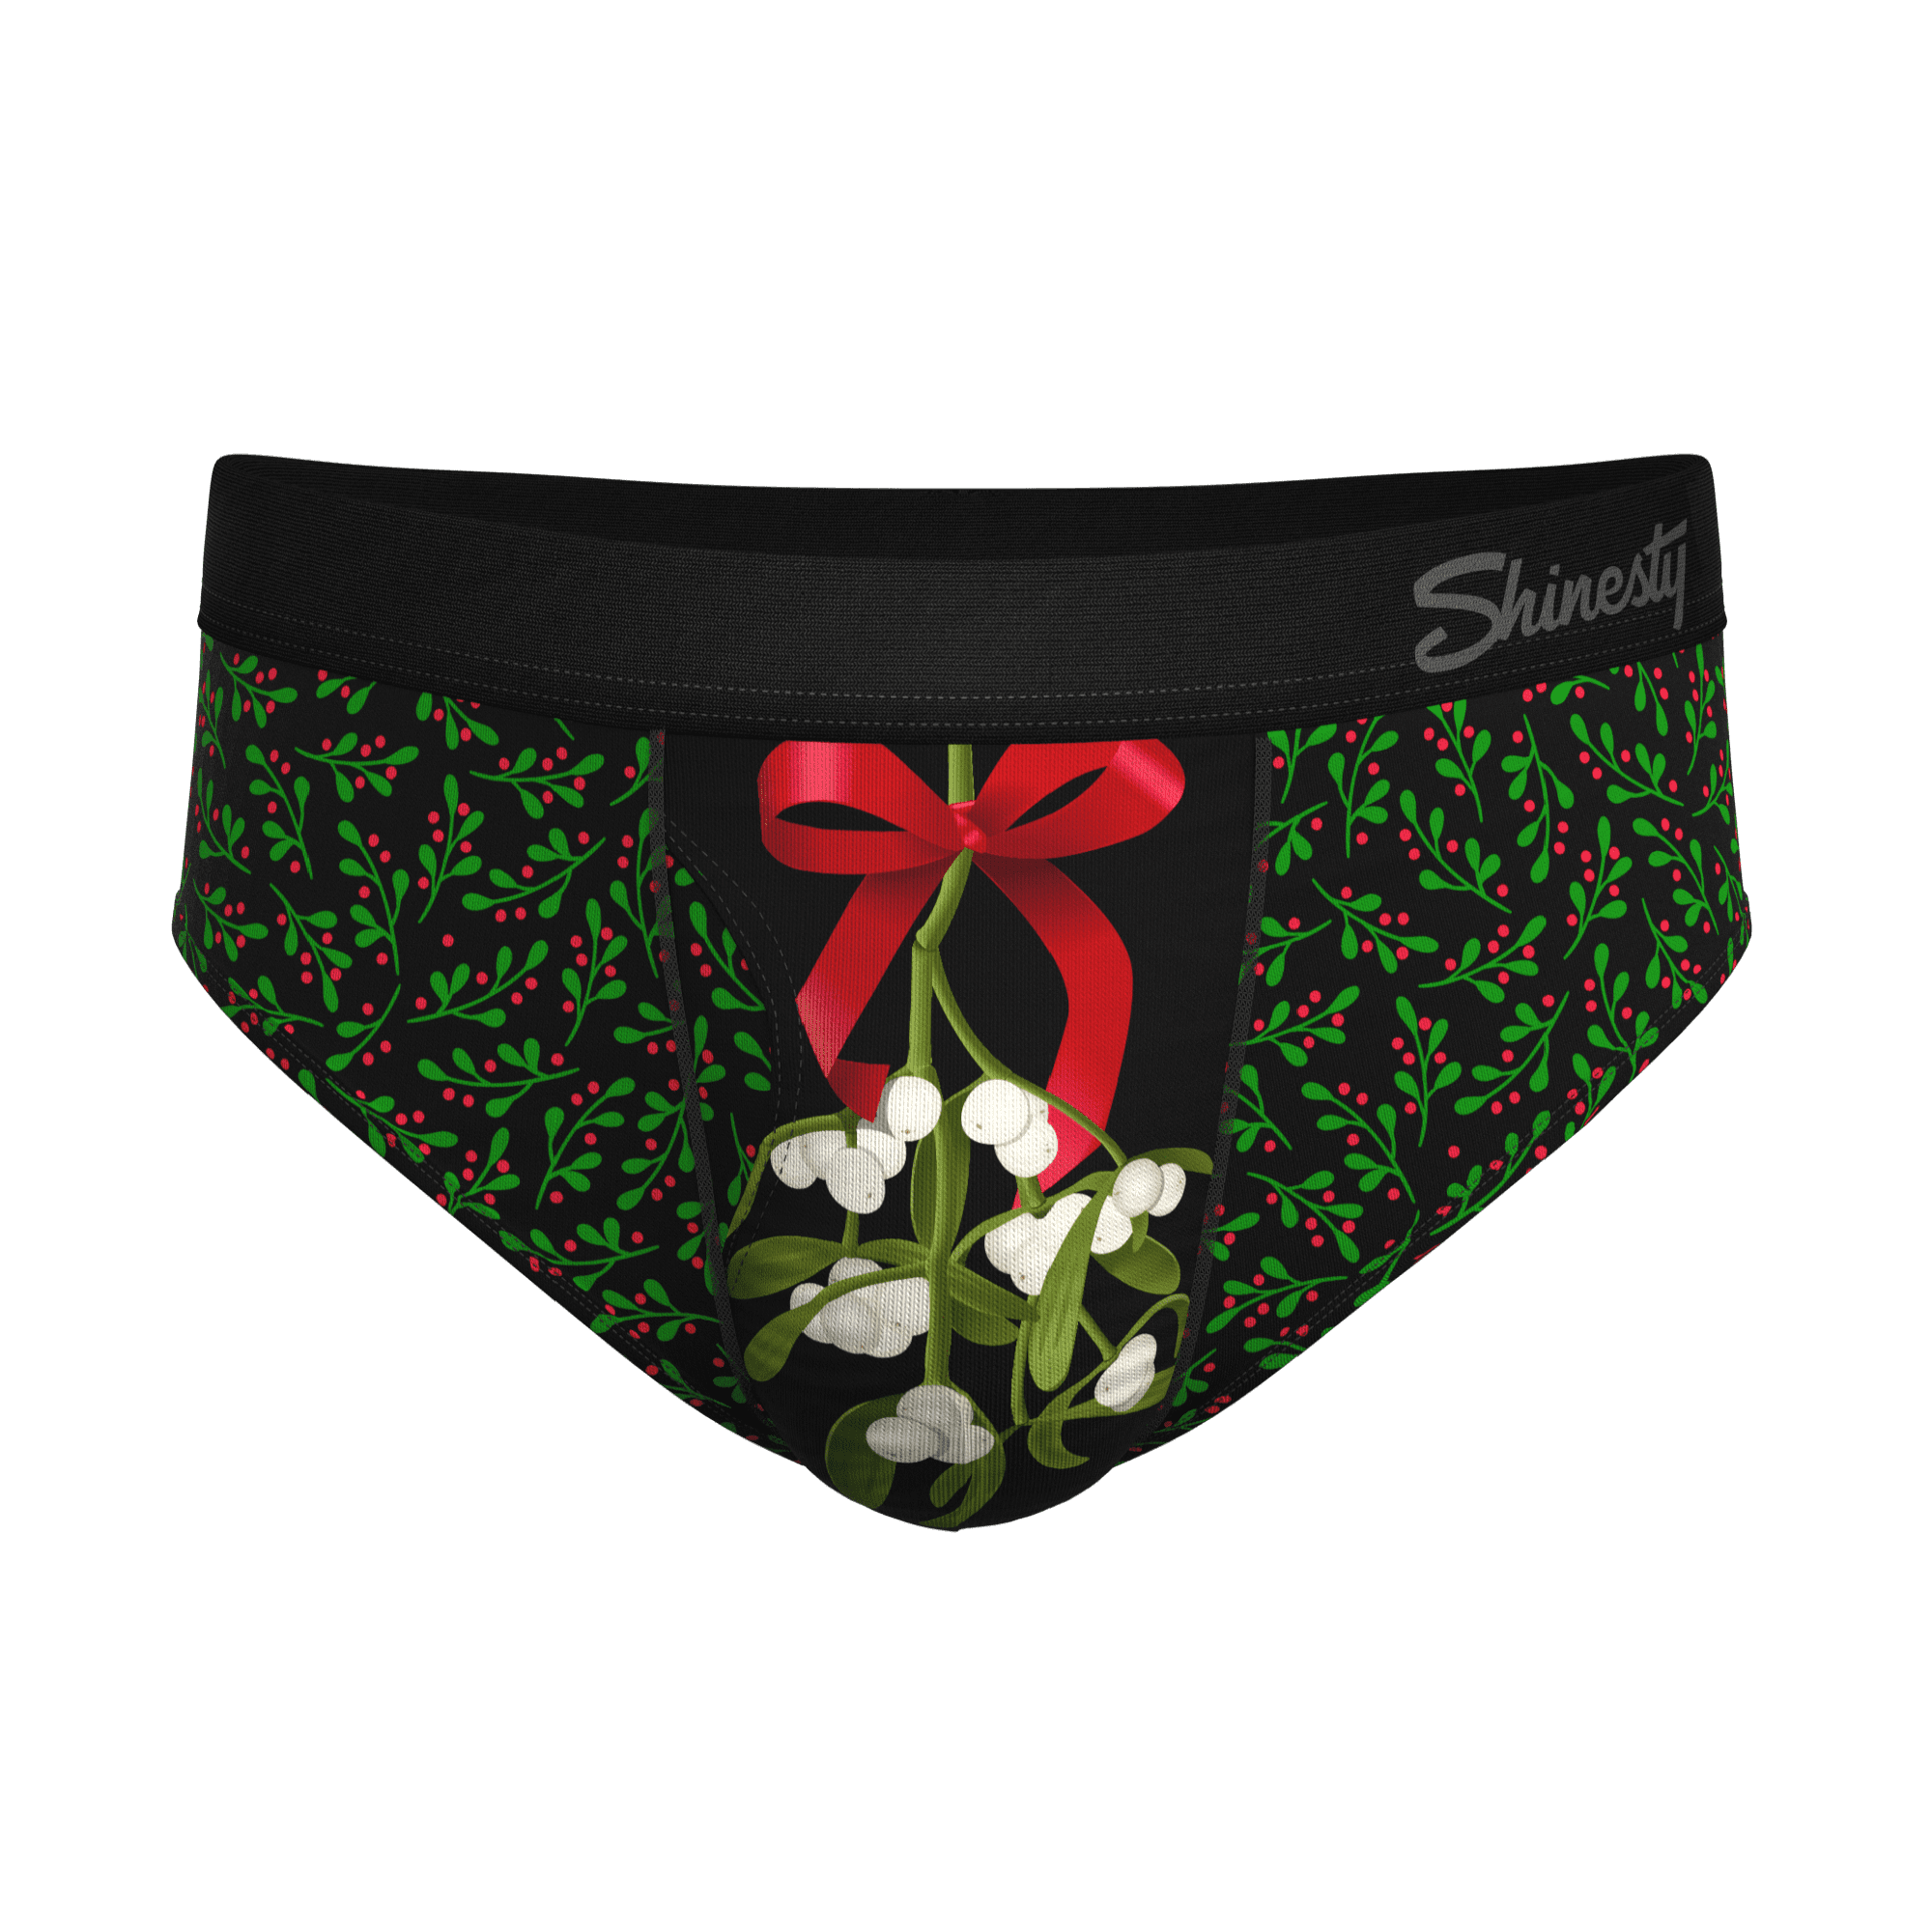 The Kiss Me There - Shinesty Mistletoe Ball Hammock Pouch Underwear With  Fly Small 